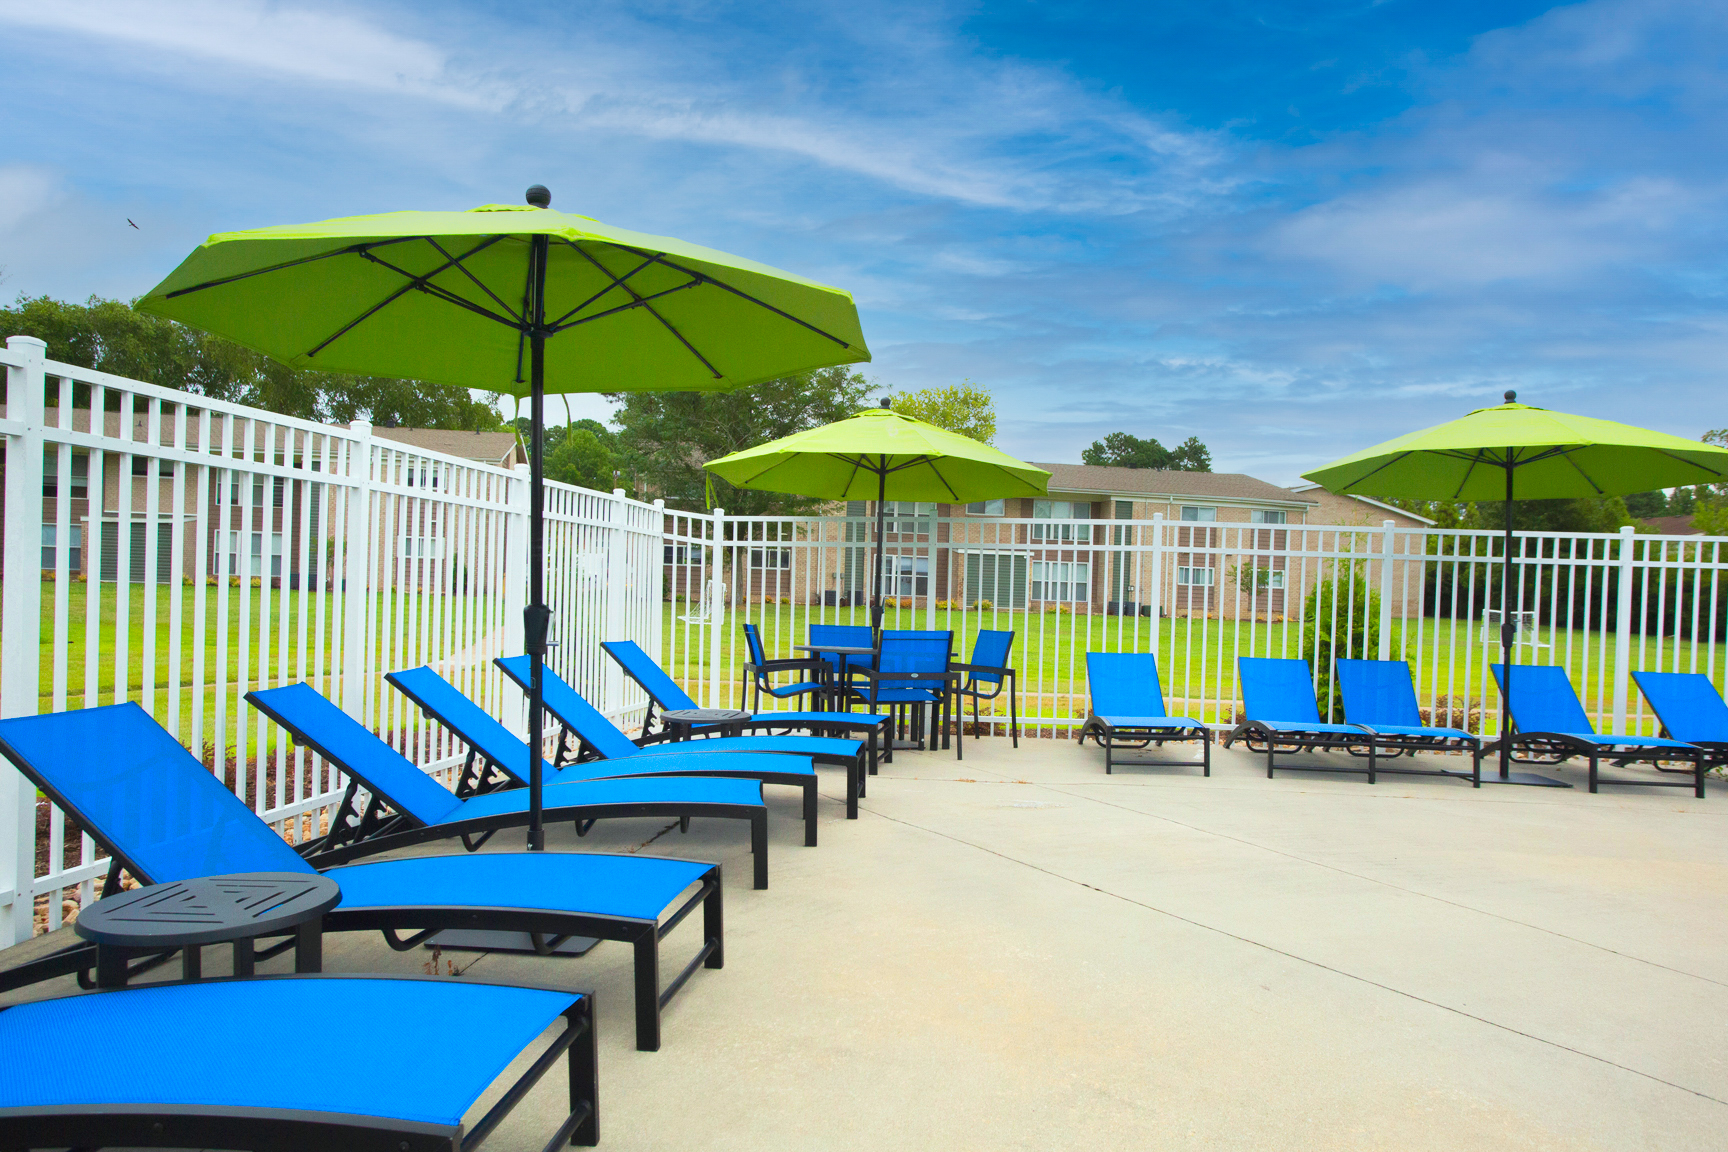 Blue lounge chairs and patio umbrellas